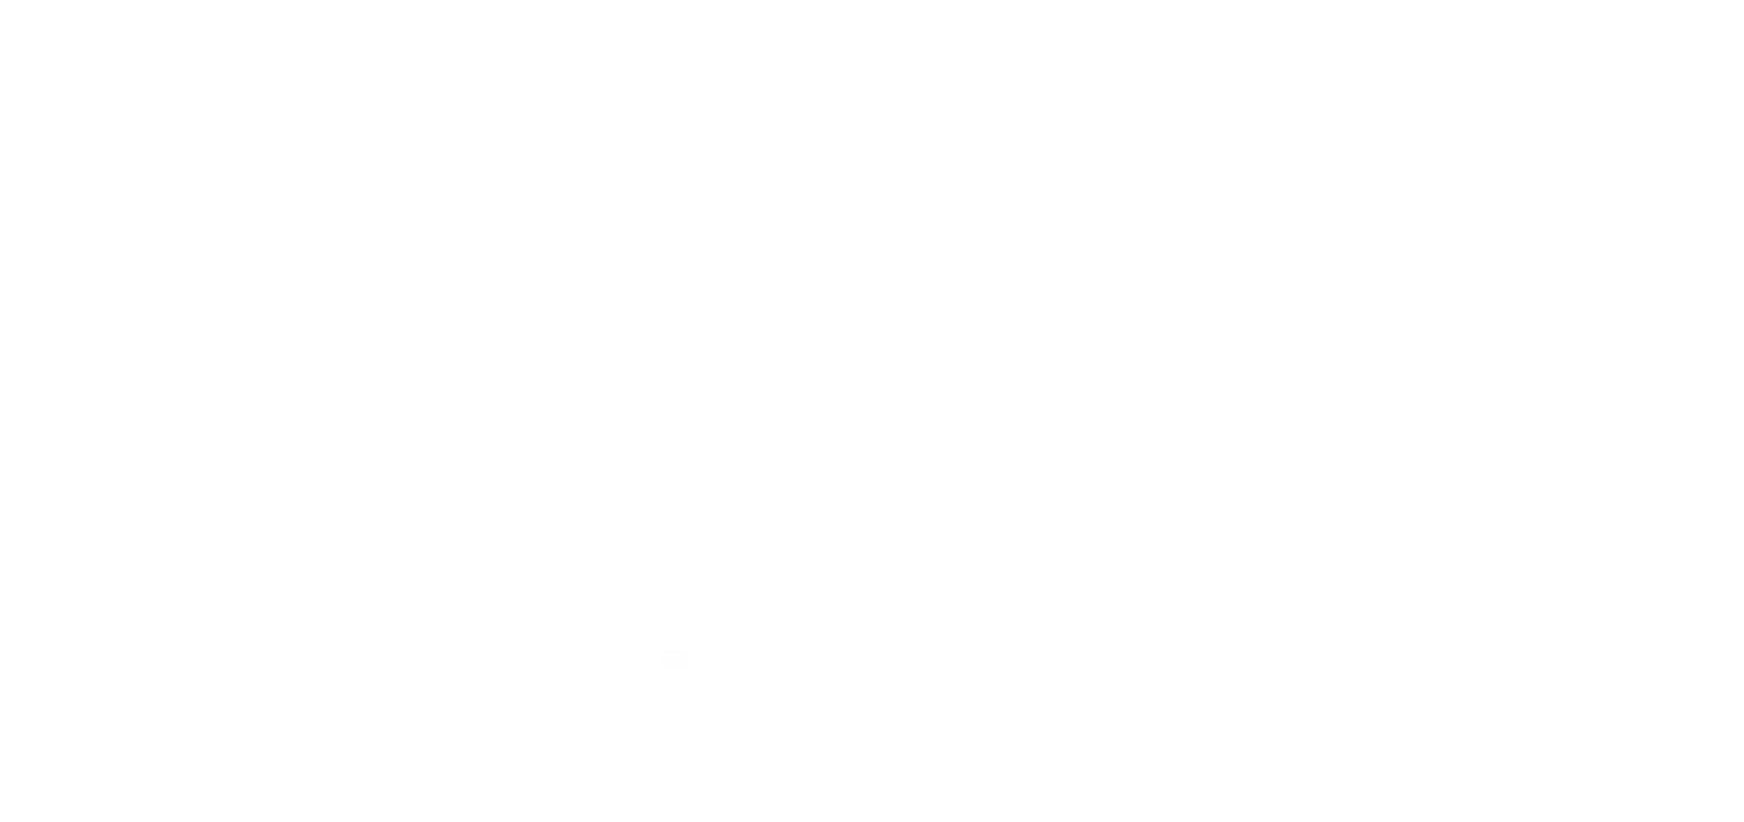 This is the Pelican Title logo.